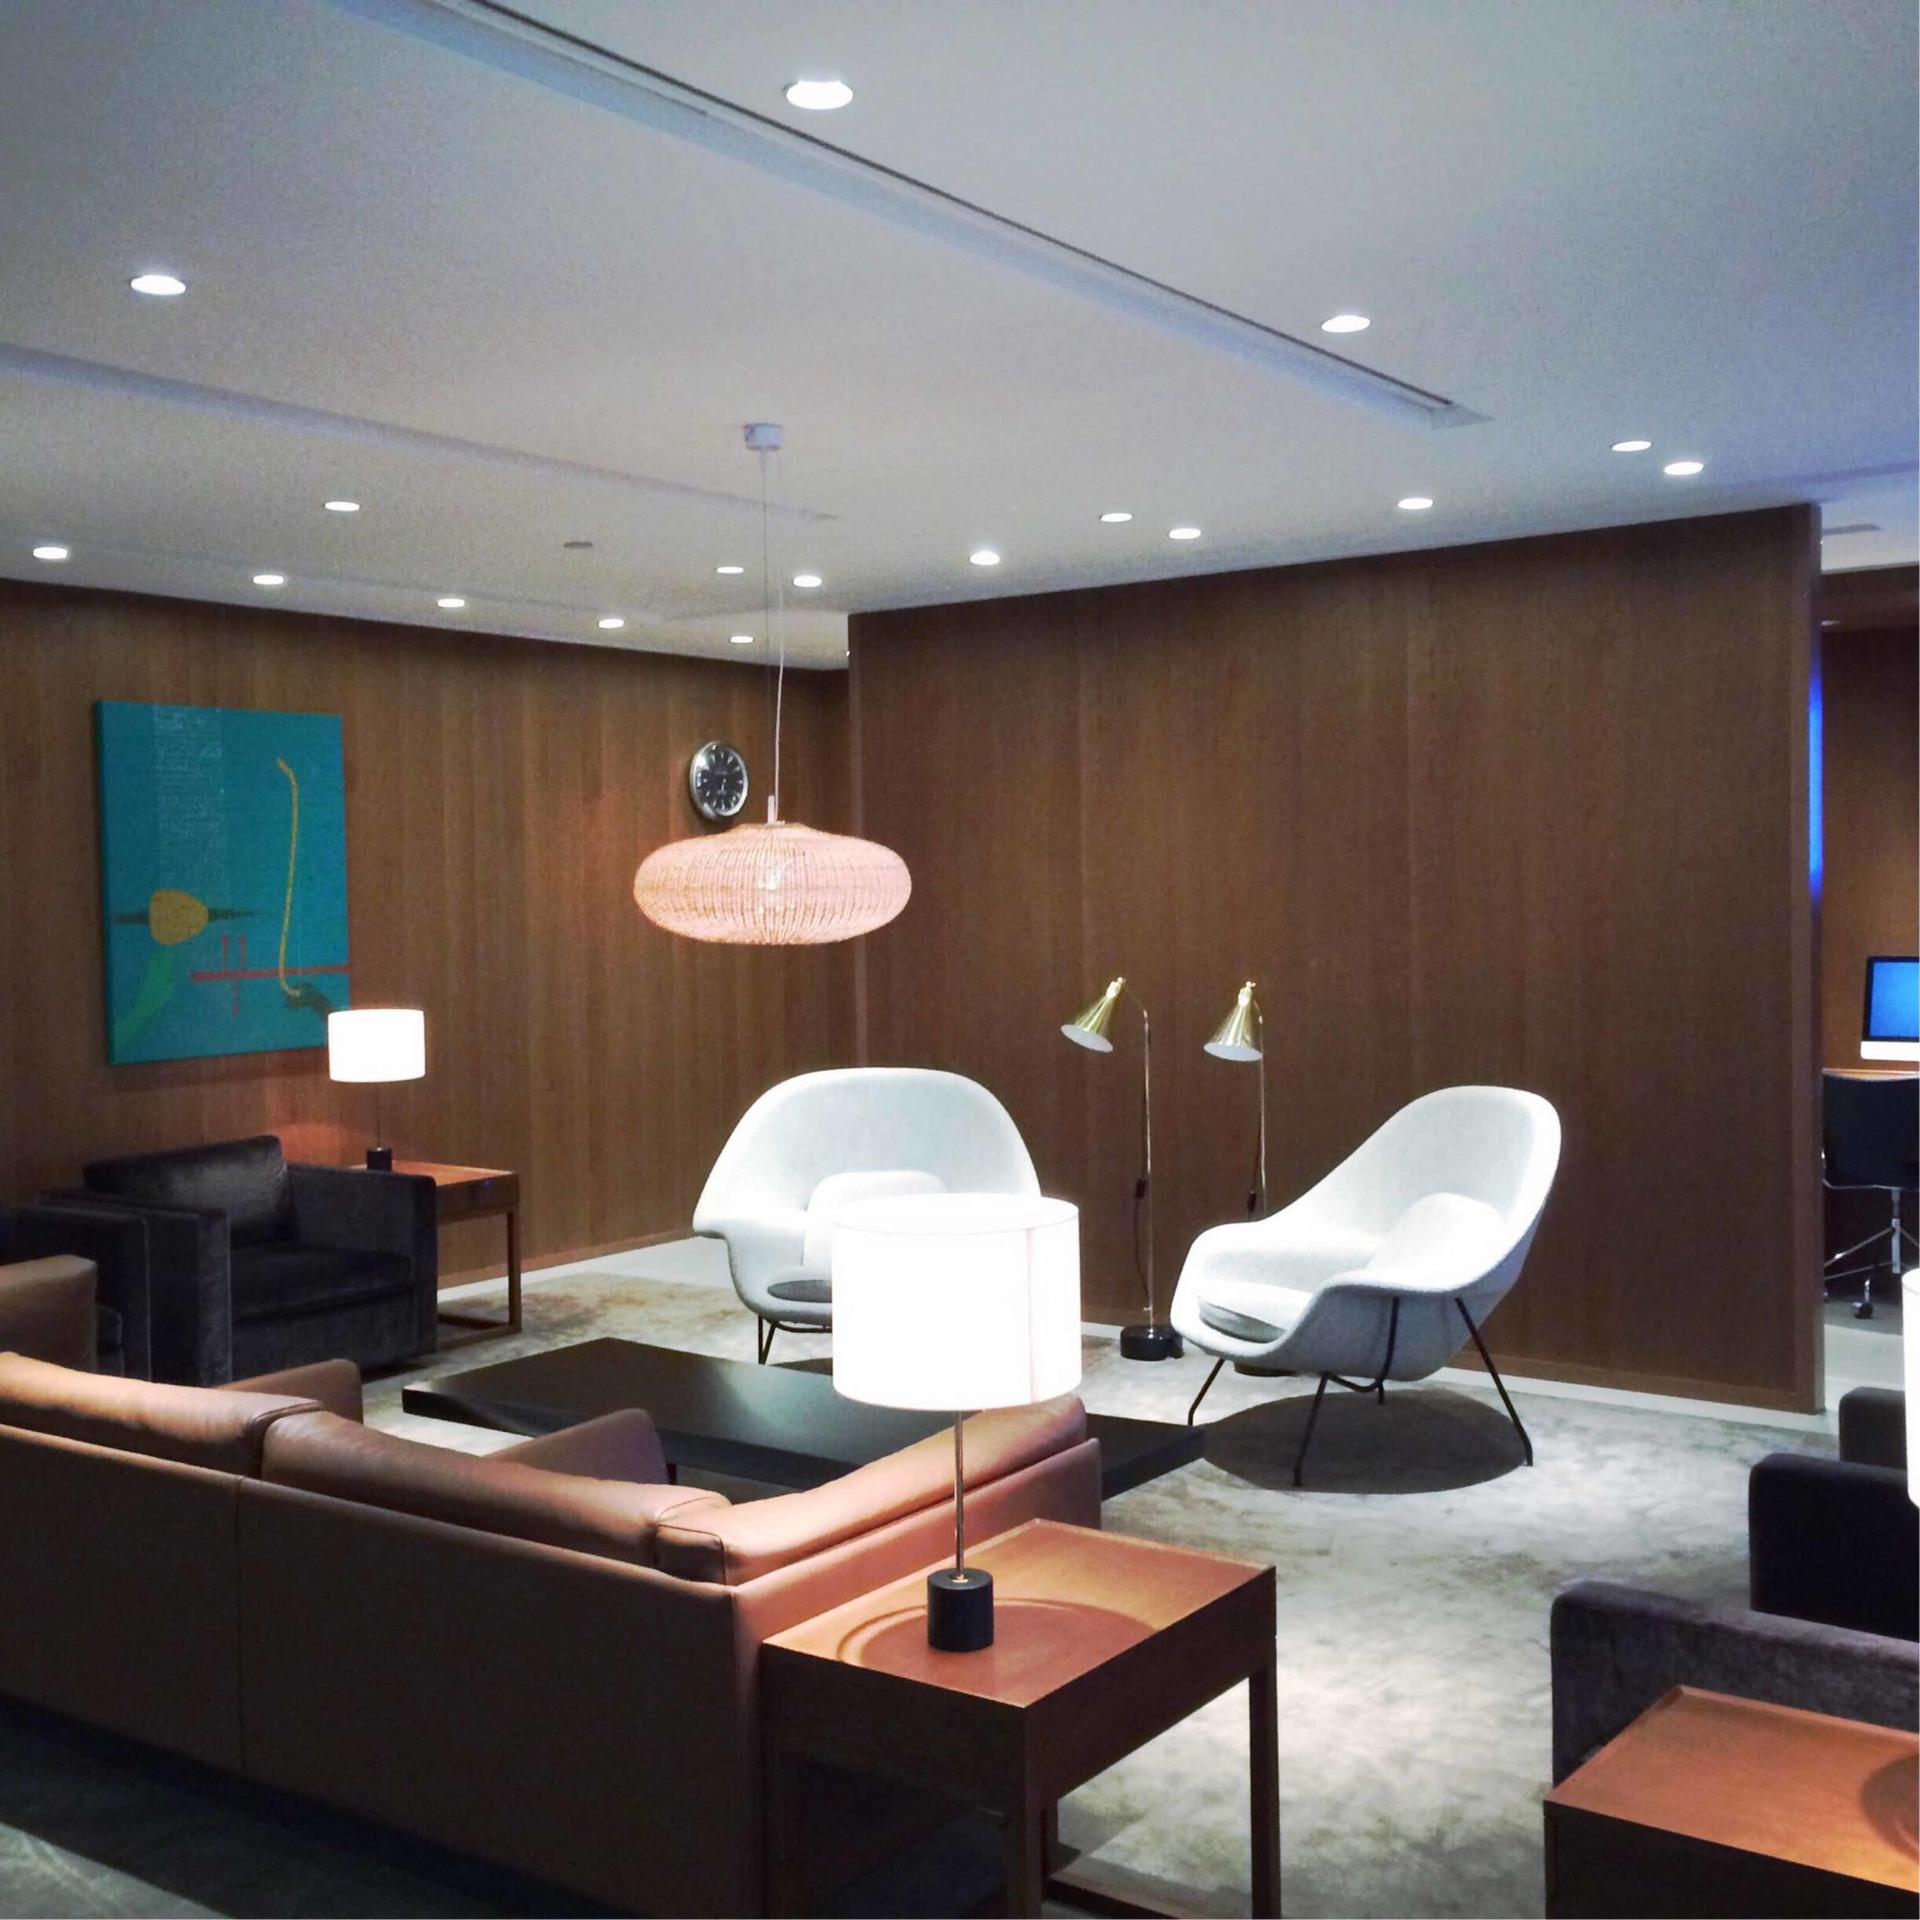 Cathay Pacific First and Business Class Lounge image 6 of 69